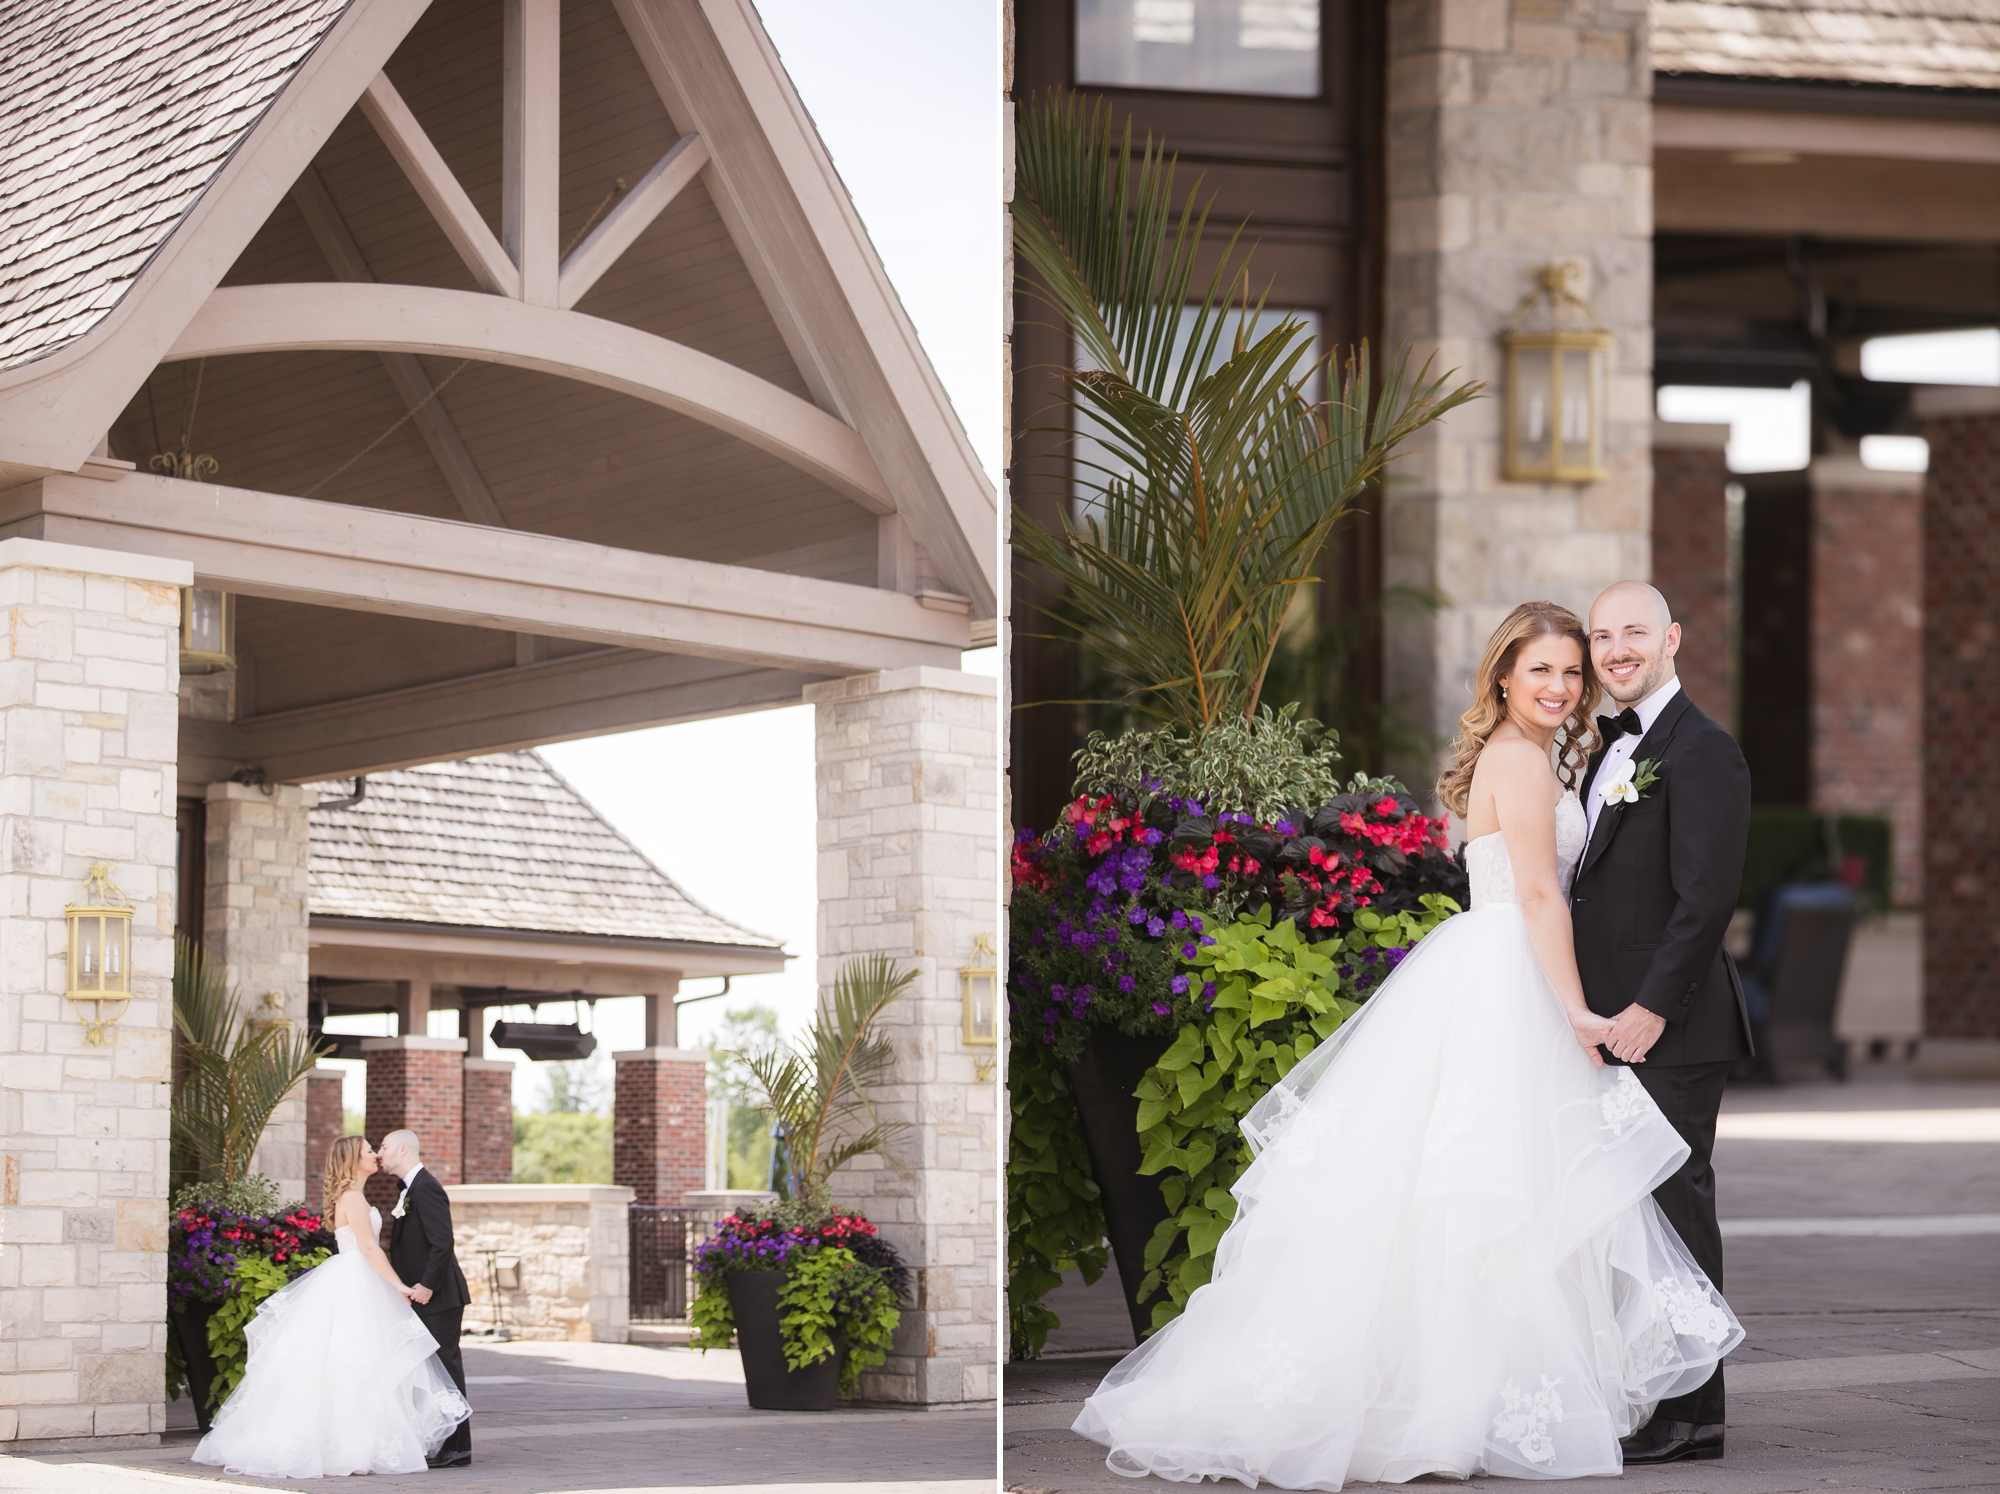 Toronto Wedding at Eagles Nest. The bride and groom pose outside Eagles Nest Golf Club venue